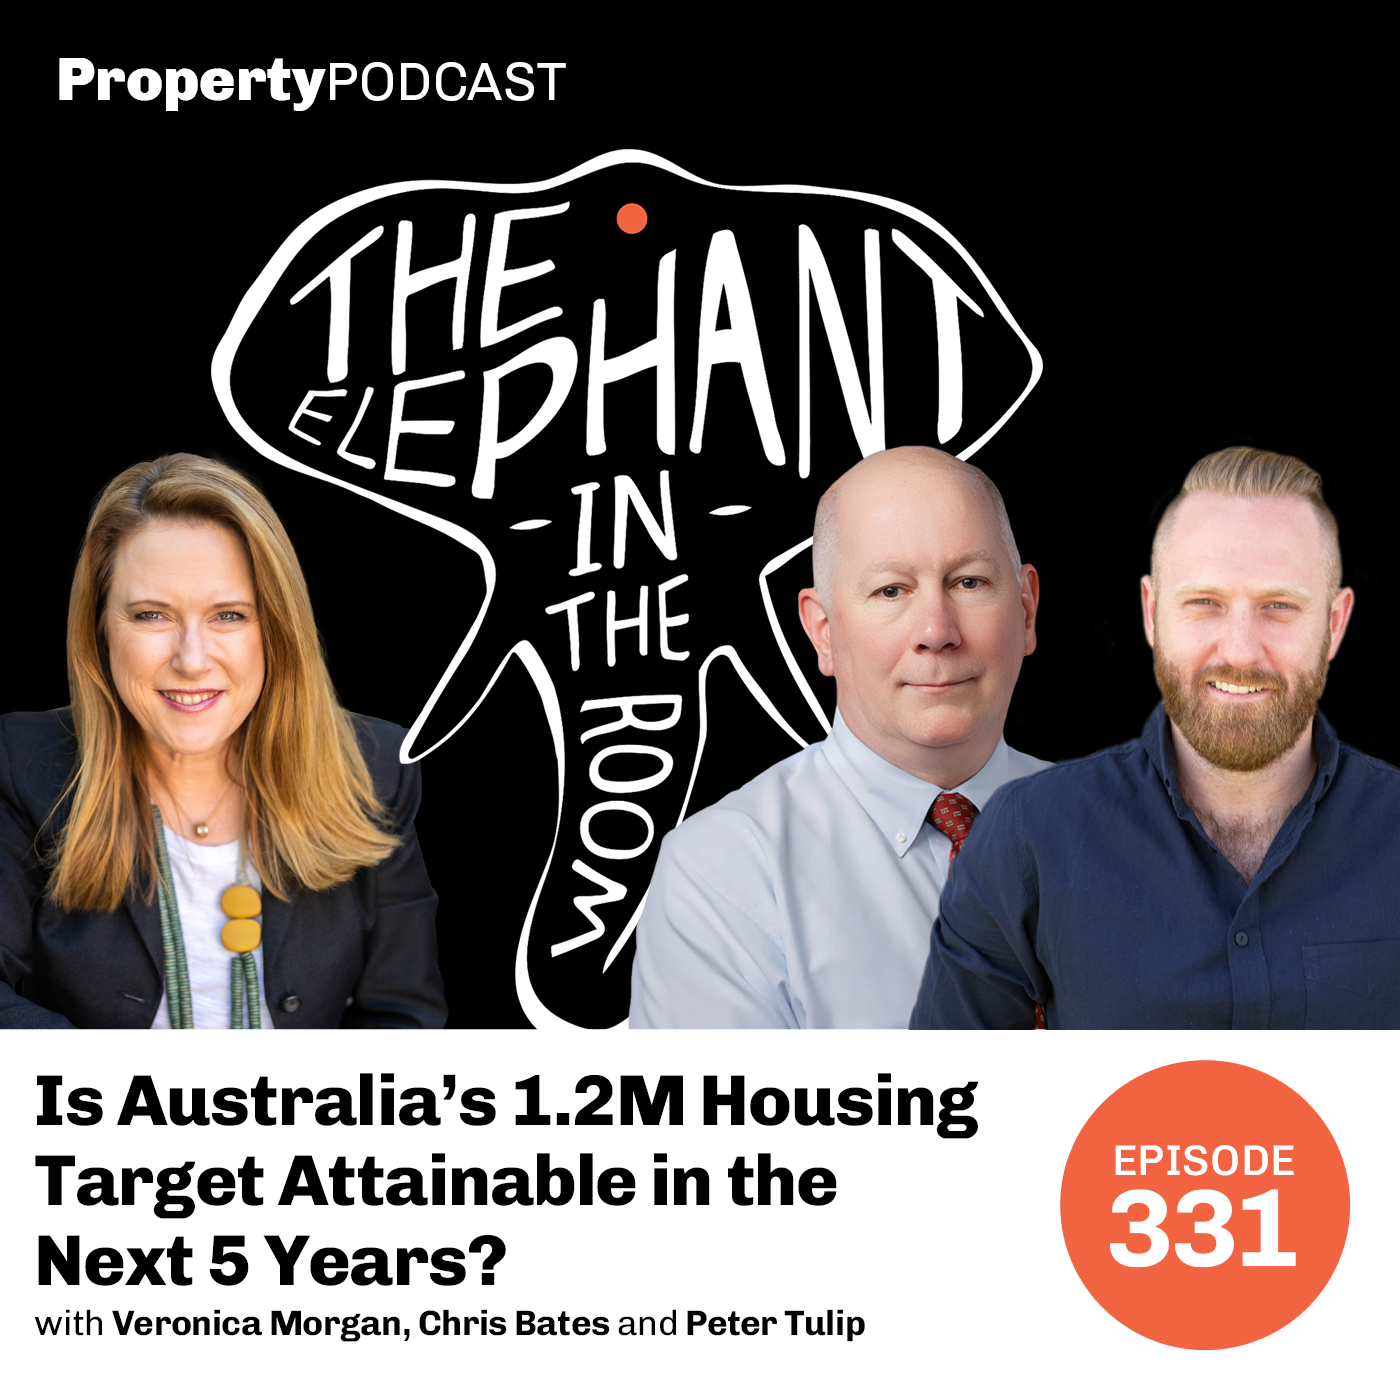 Is Australia’s 1.2M Housing Target Attainable in the Next 5 Years?